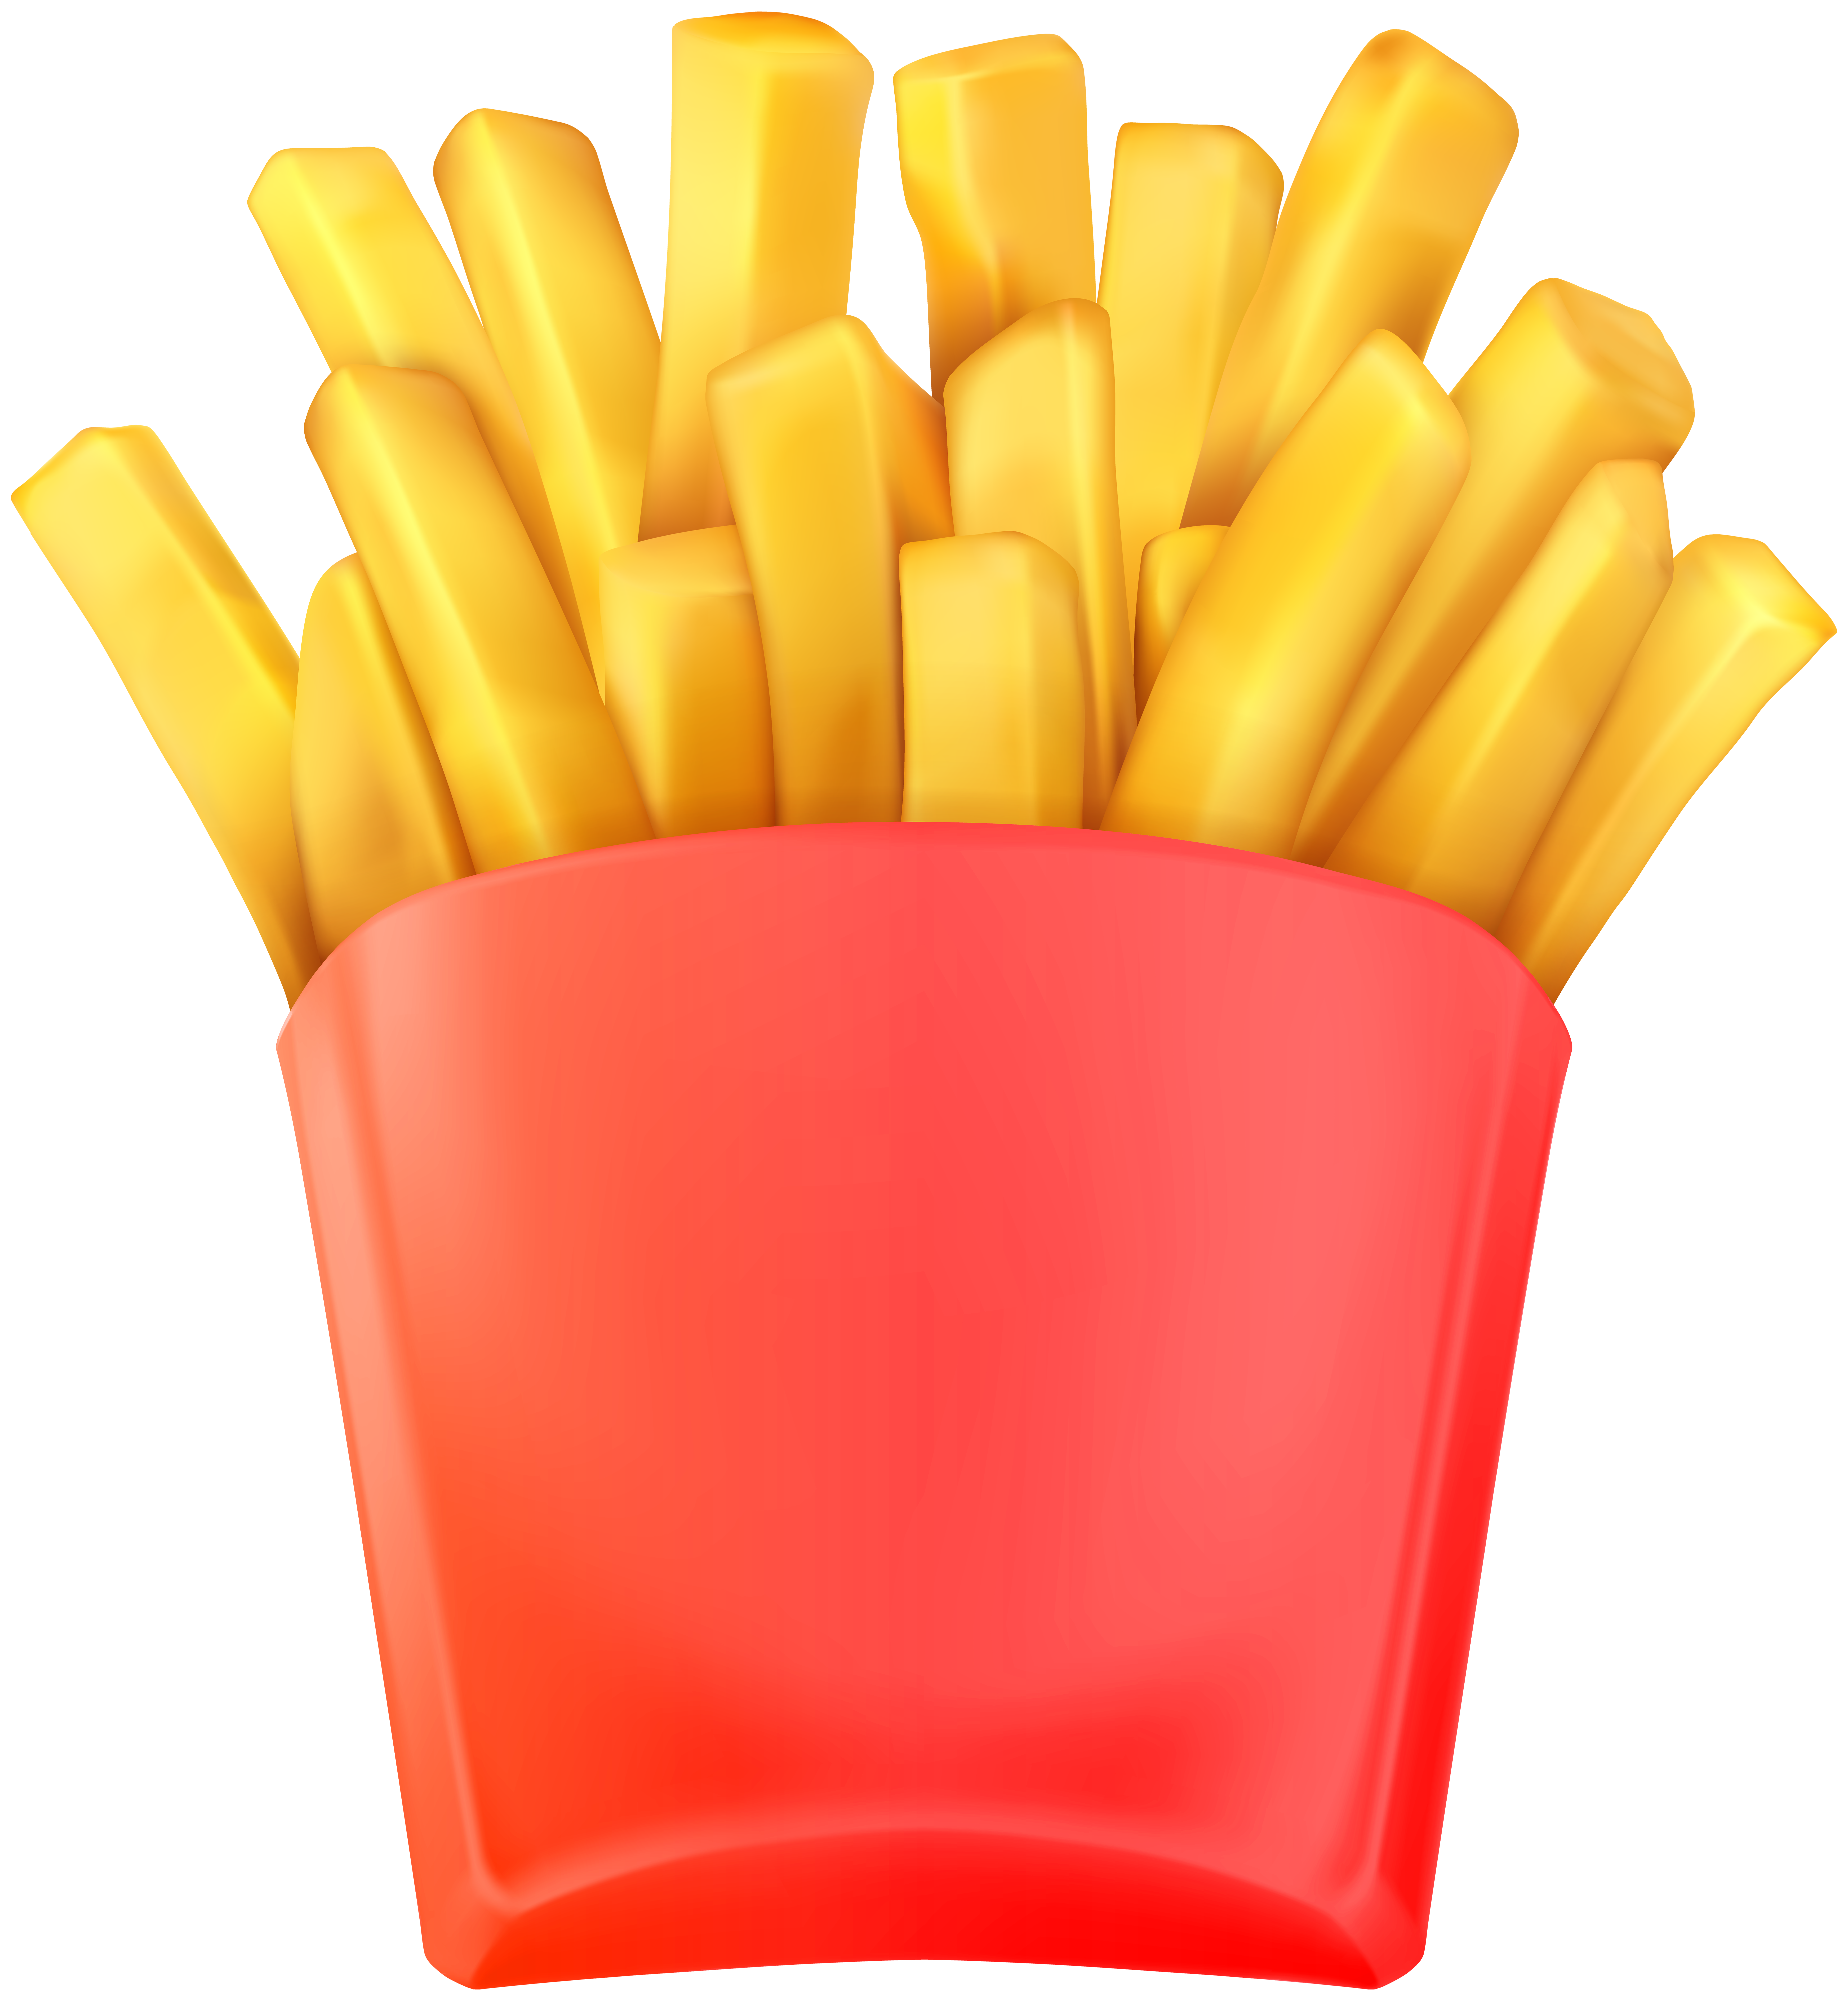 French Fries Transparent Clip Art PNG Image | Gallery 